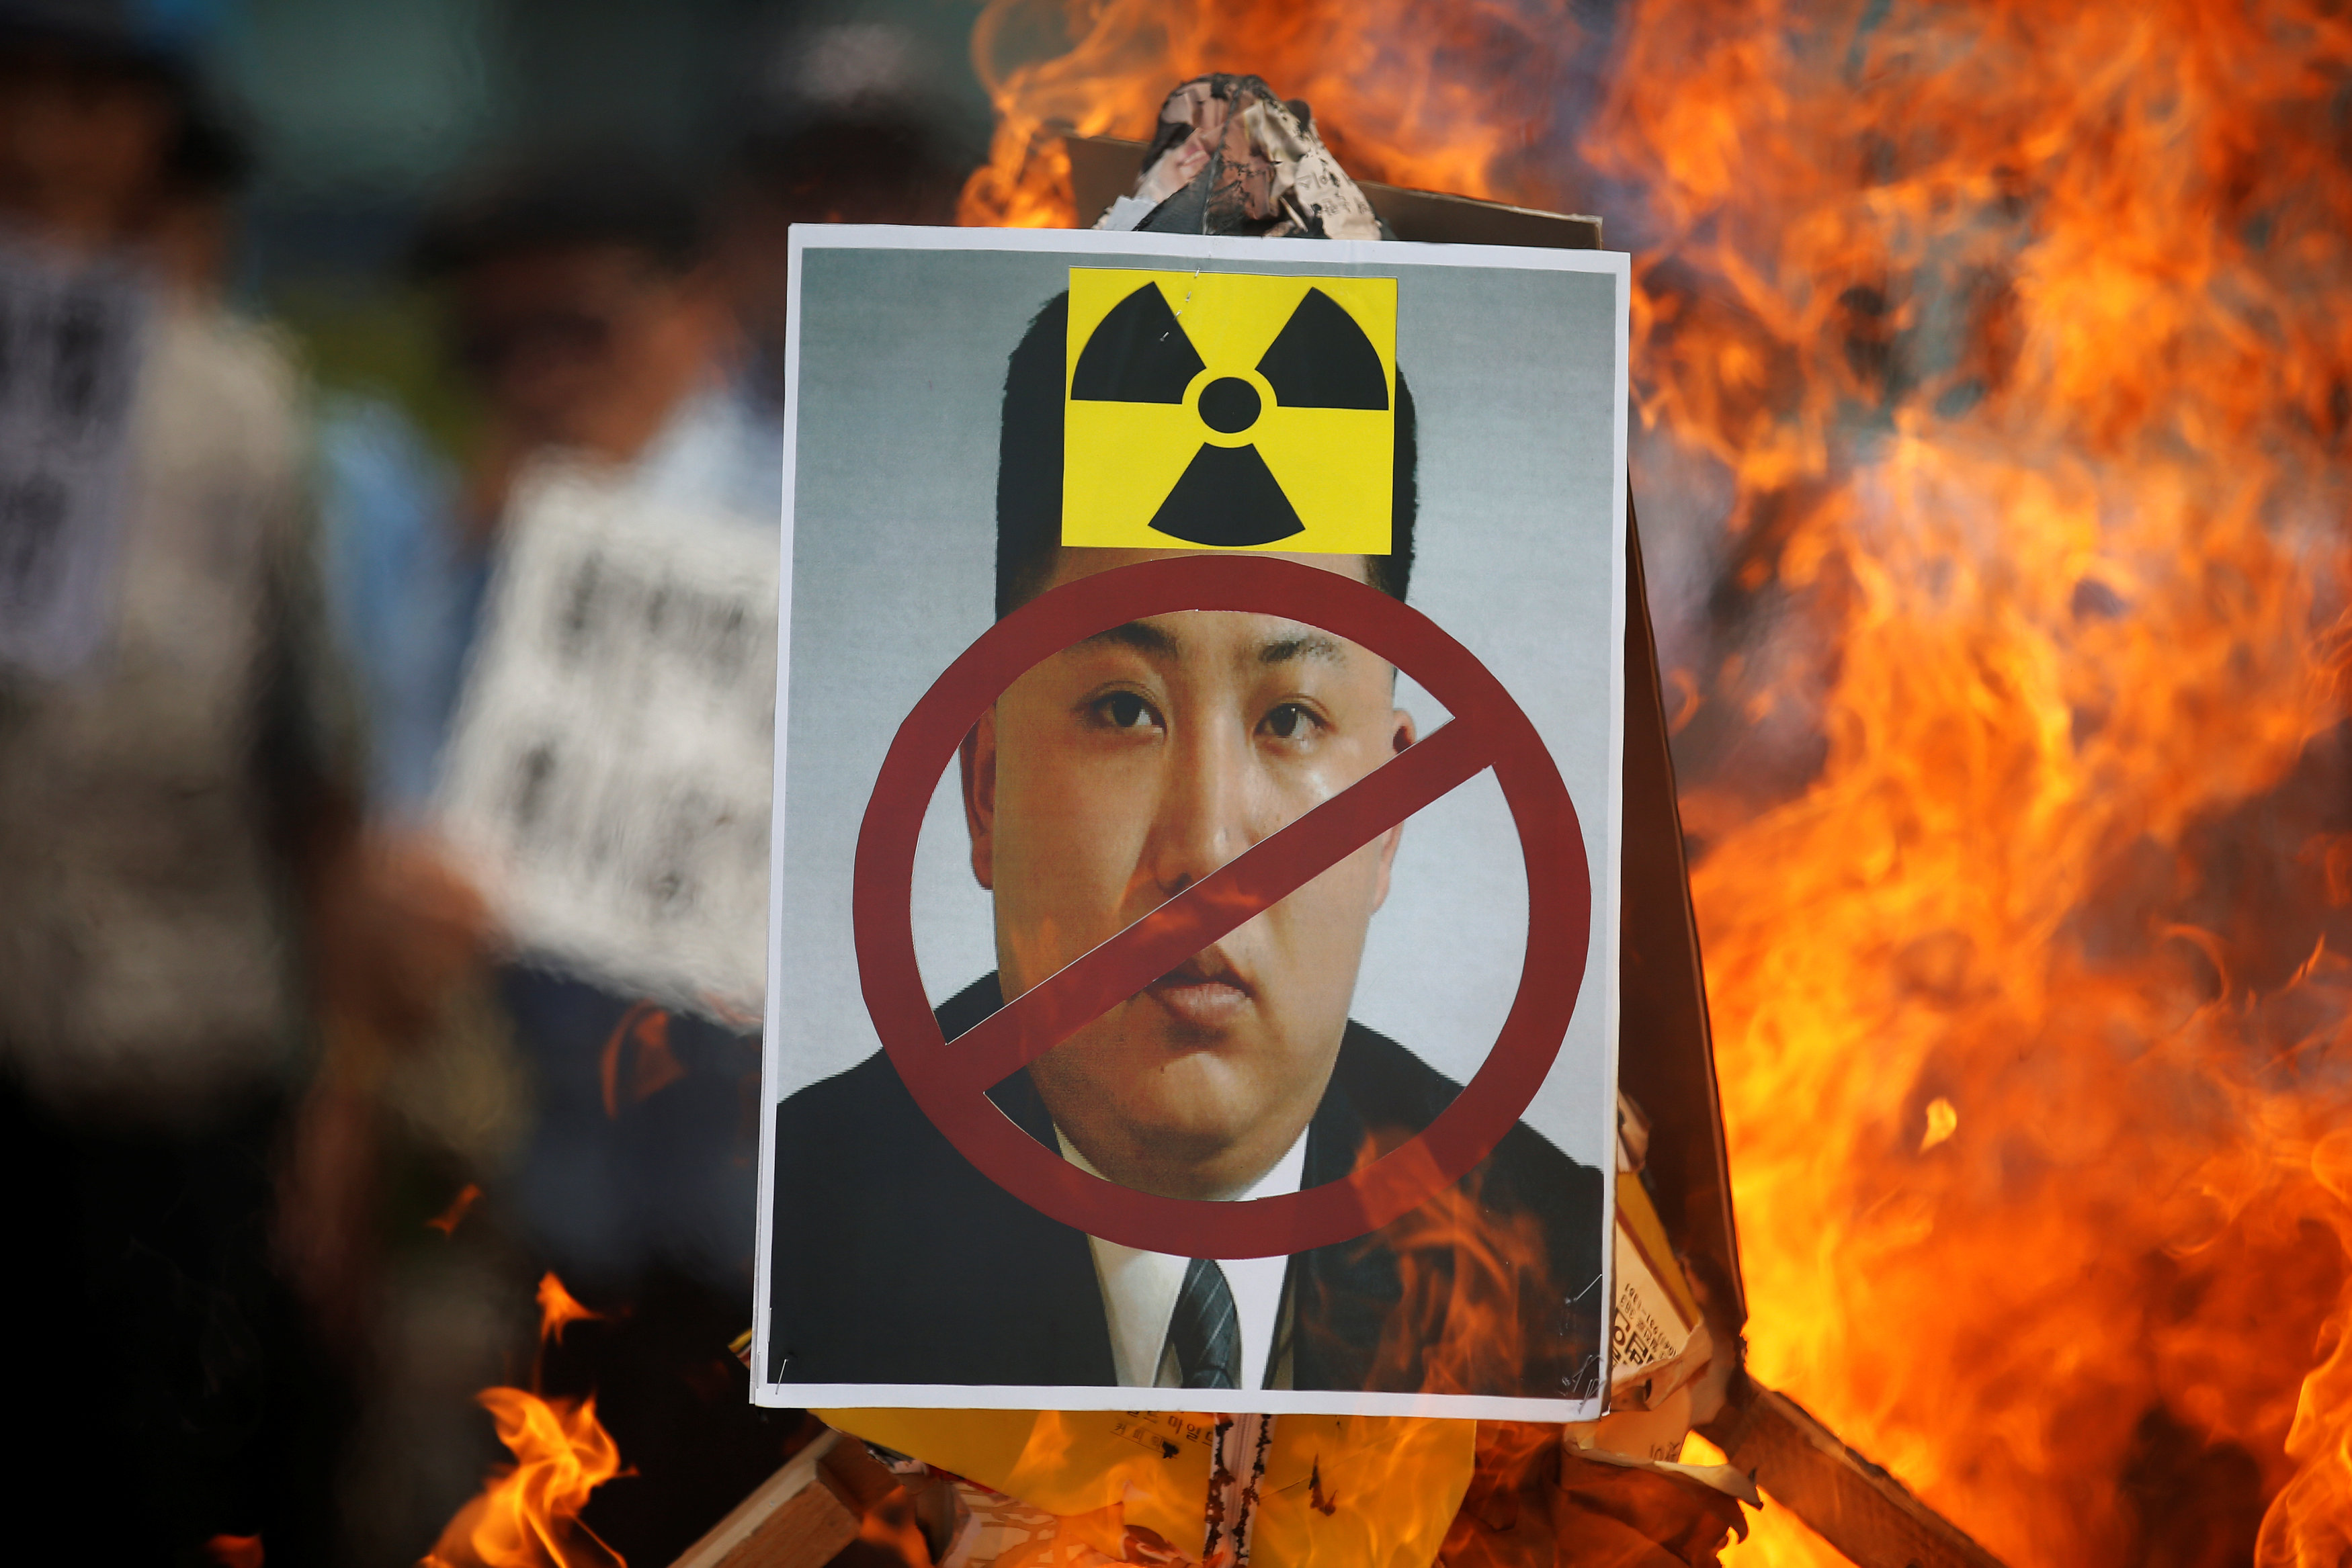 A poster featuring North Korean leader Kim Jong Un is set on fire during an anti-North Korea rally in central Seoul on Saturday. | REUTERS